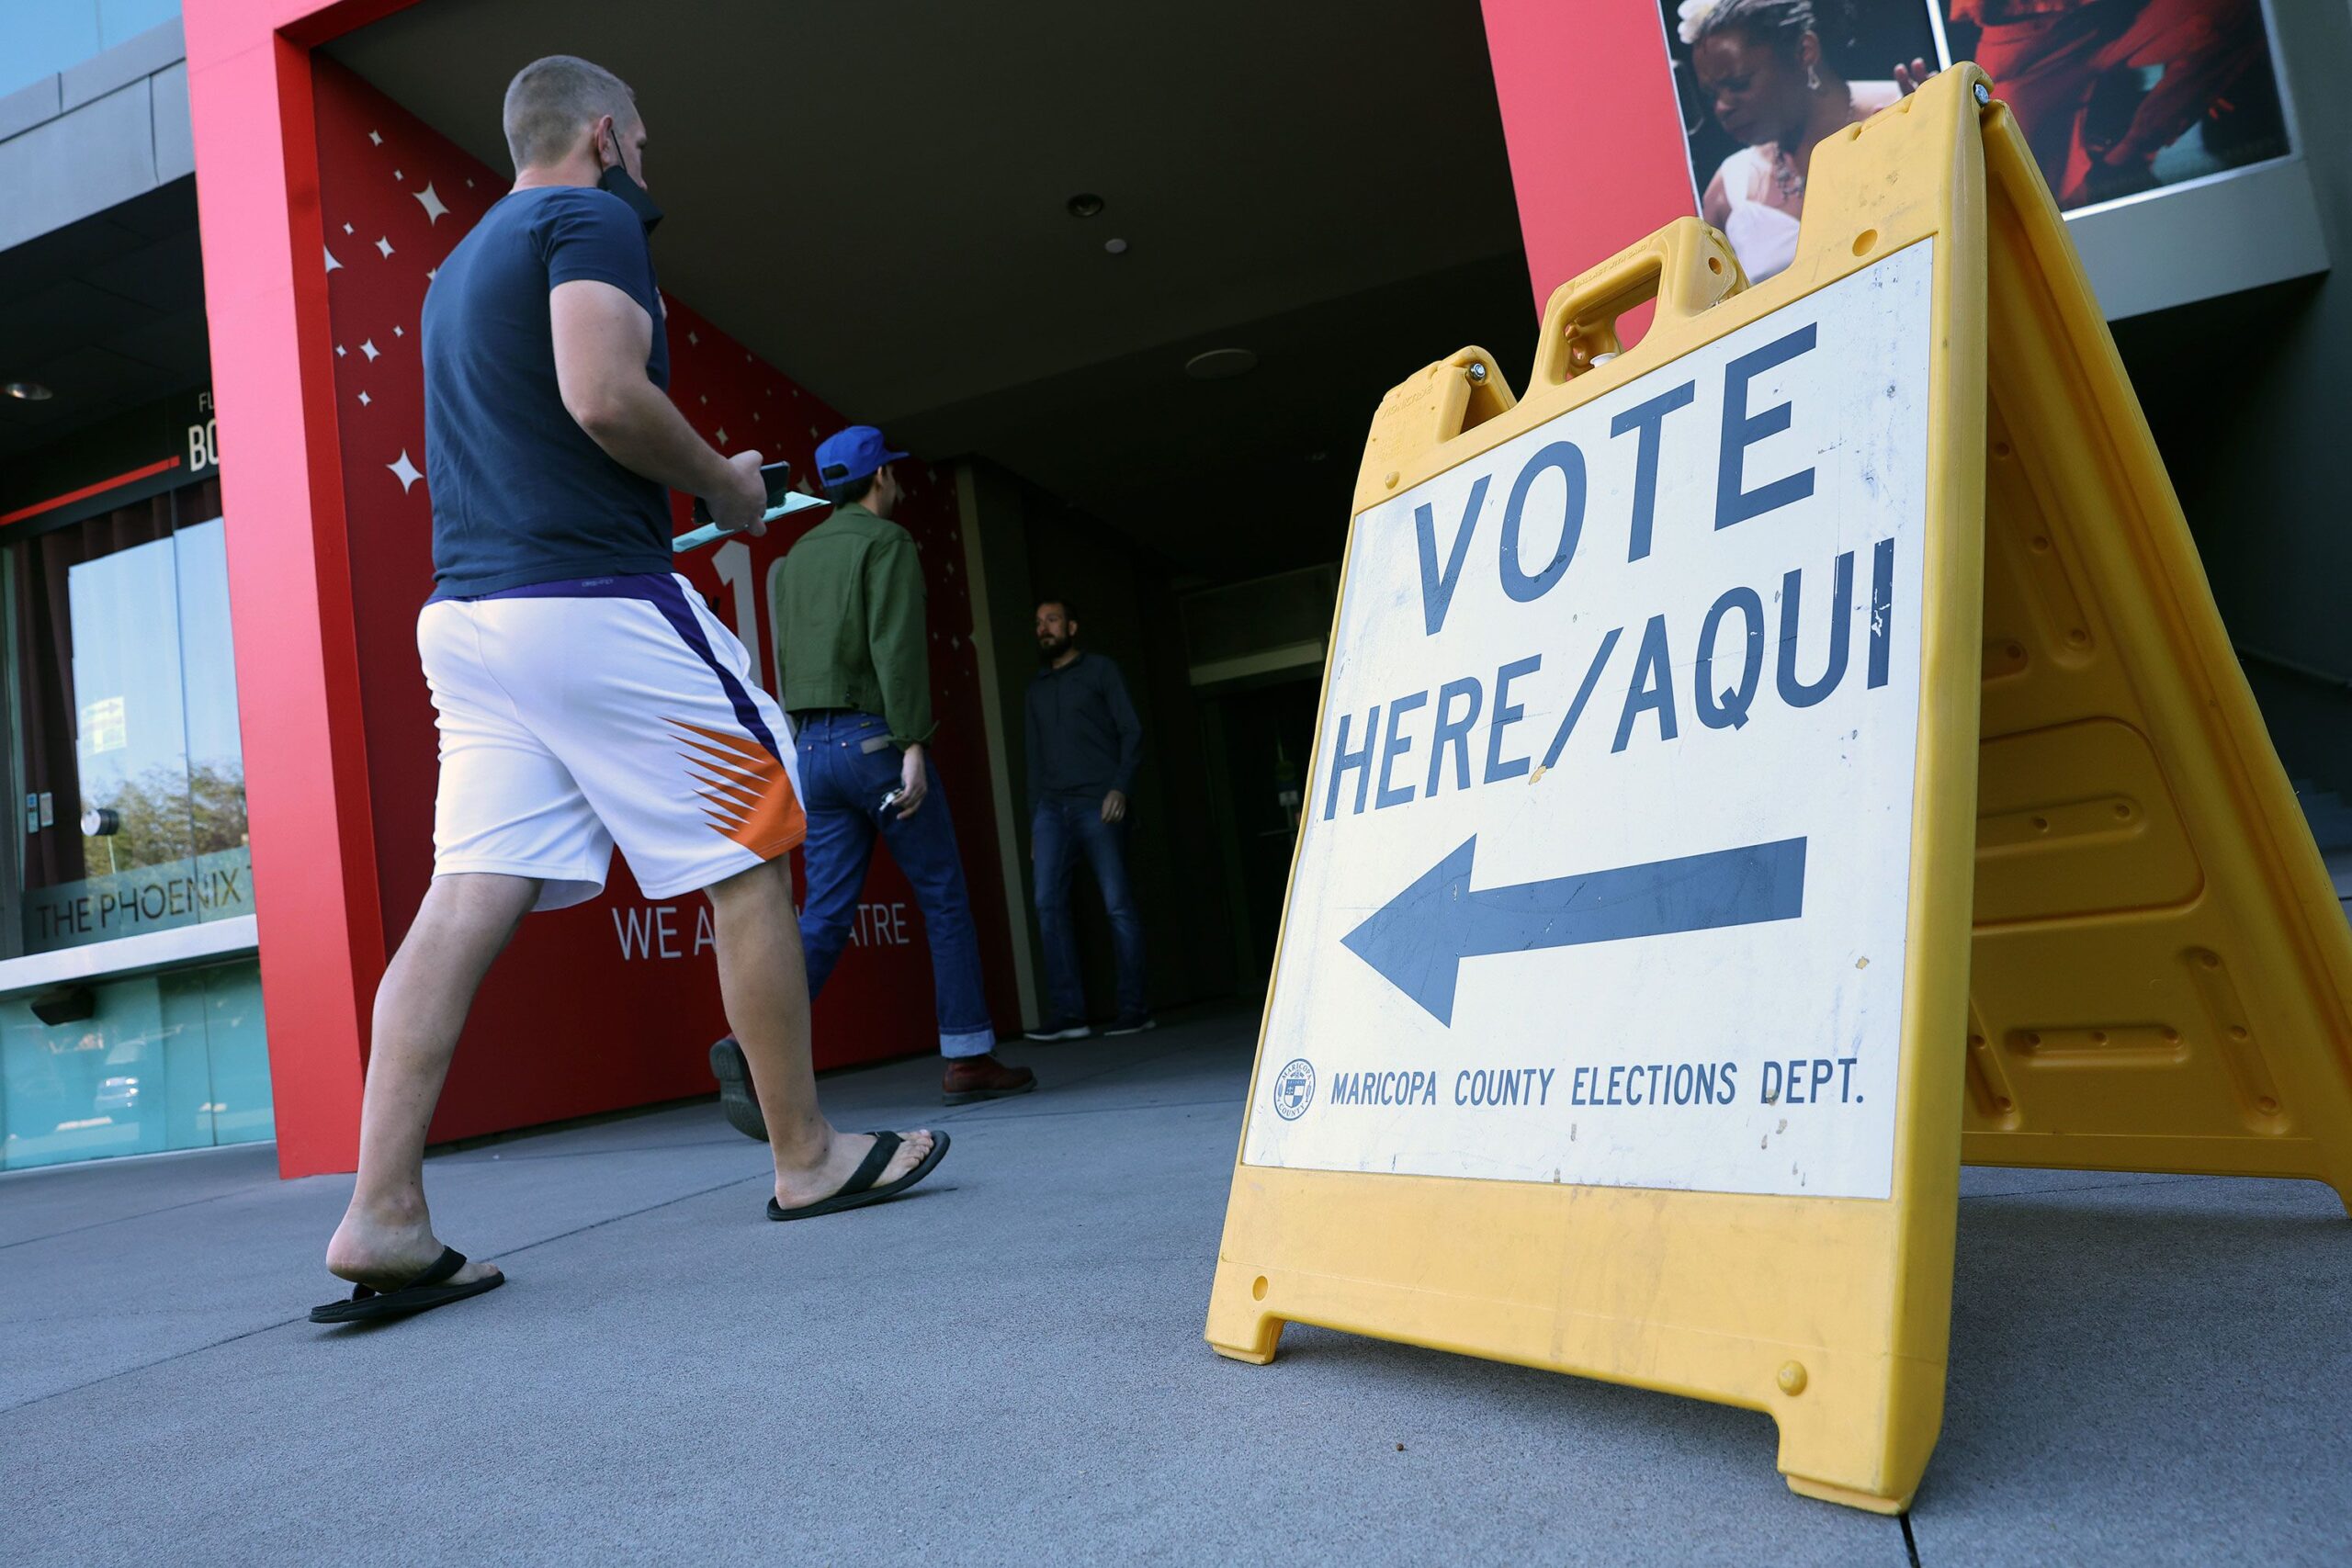 Voters arrive to cast their ballots at the Phoenix Art Museum on November 8, 2022. (Kevin Dietsch/G...